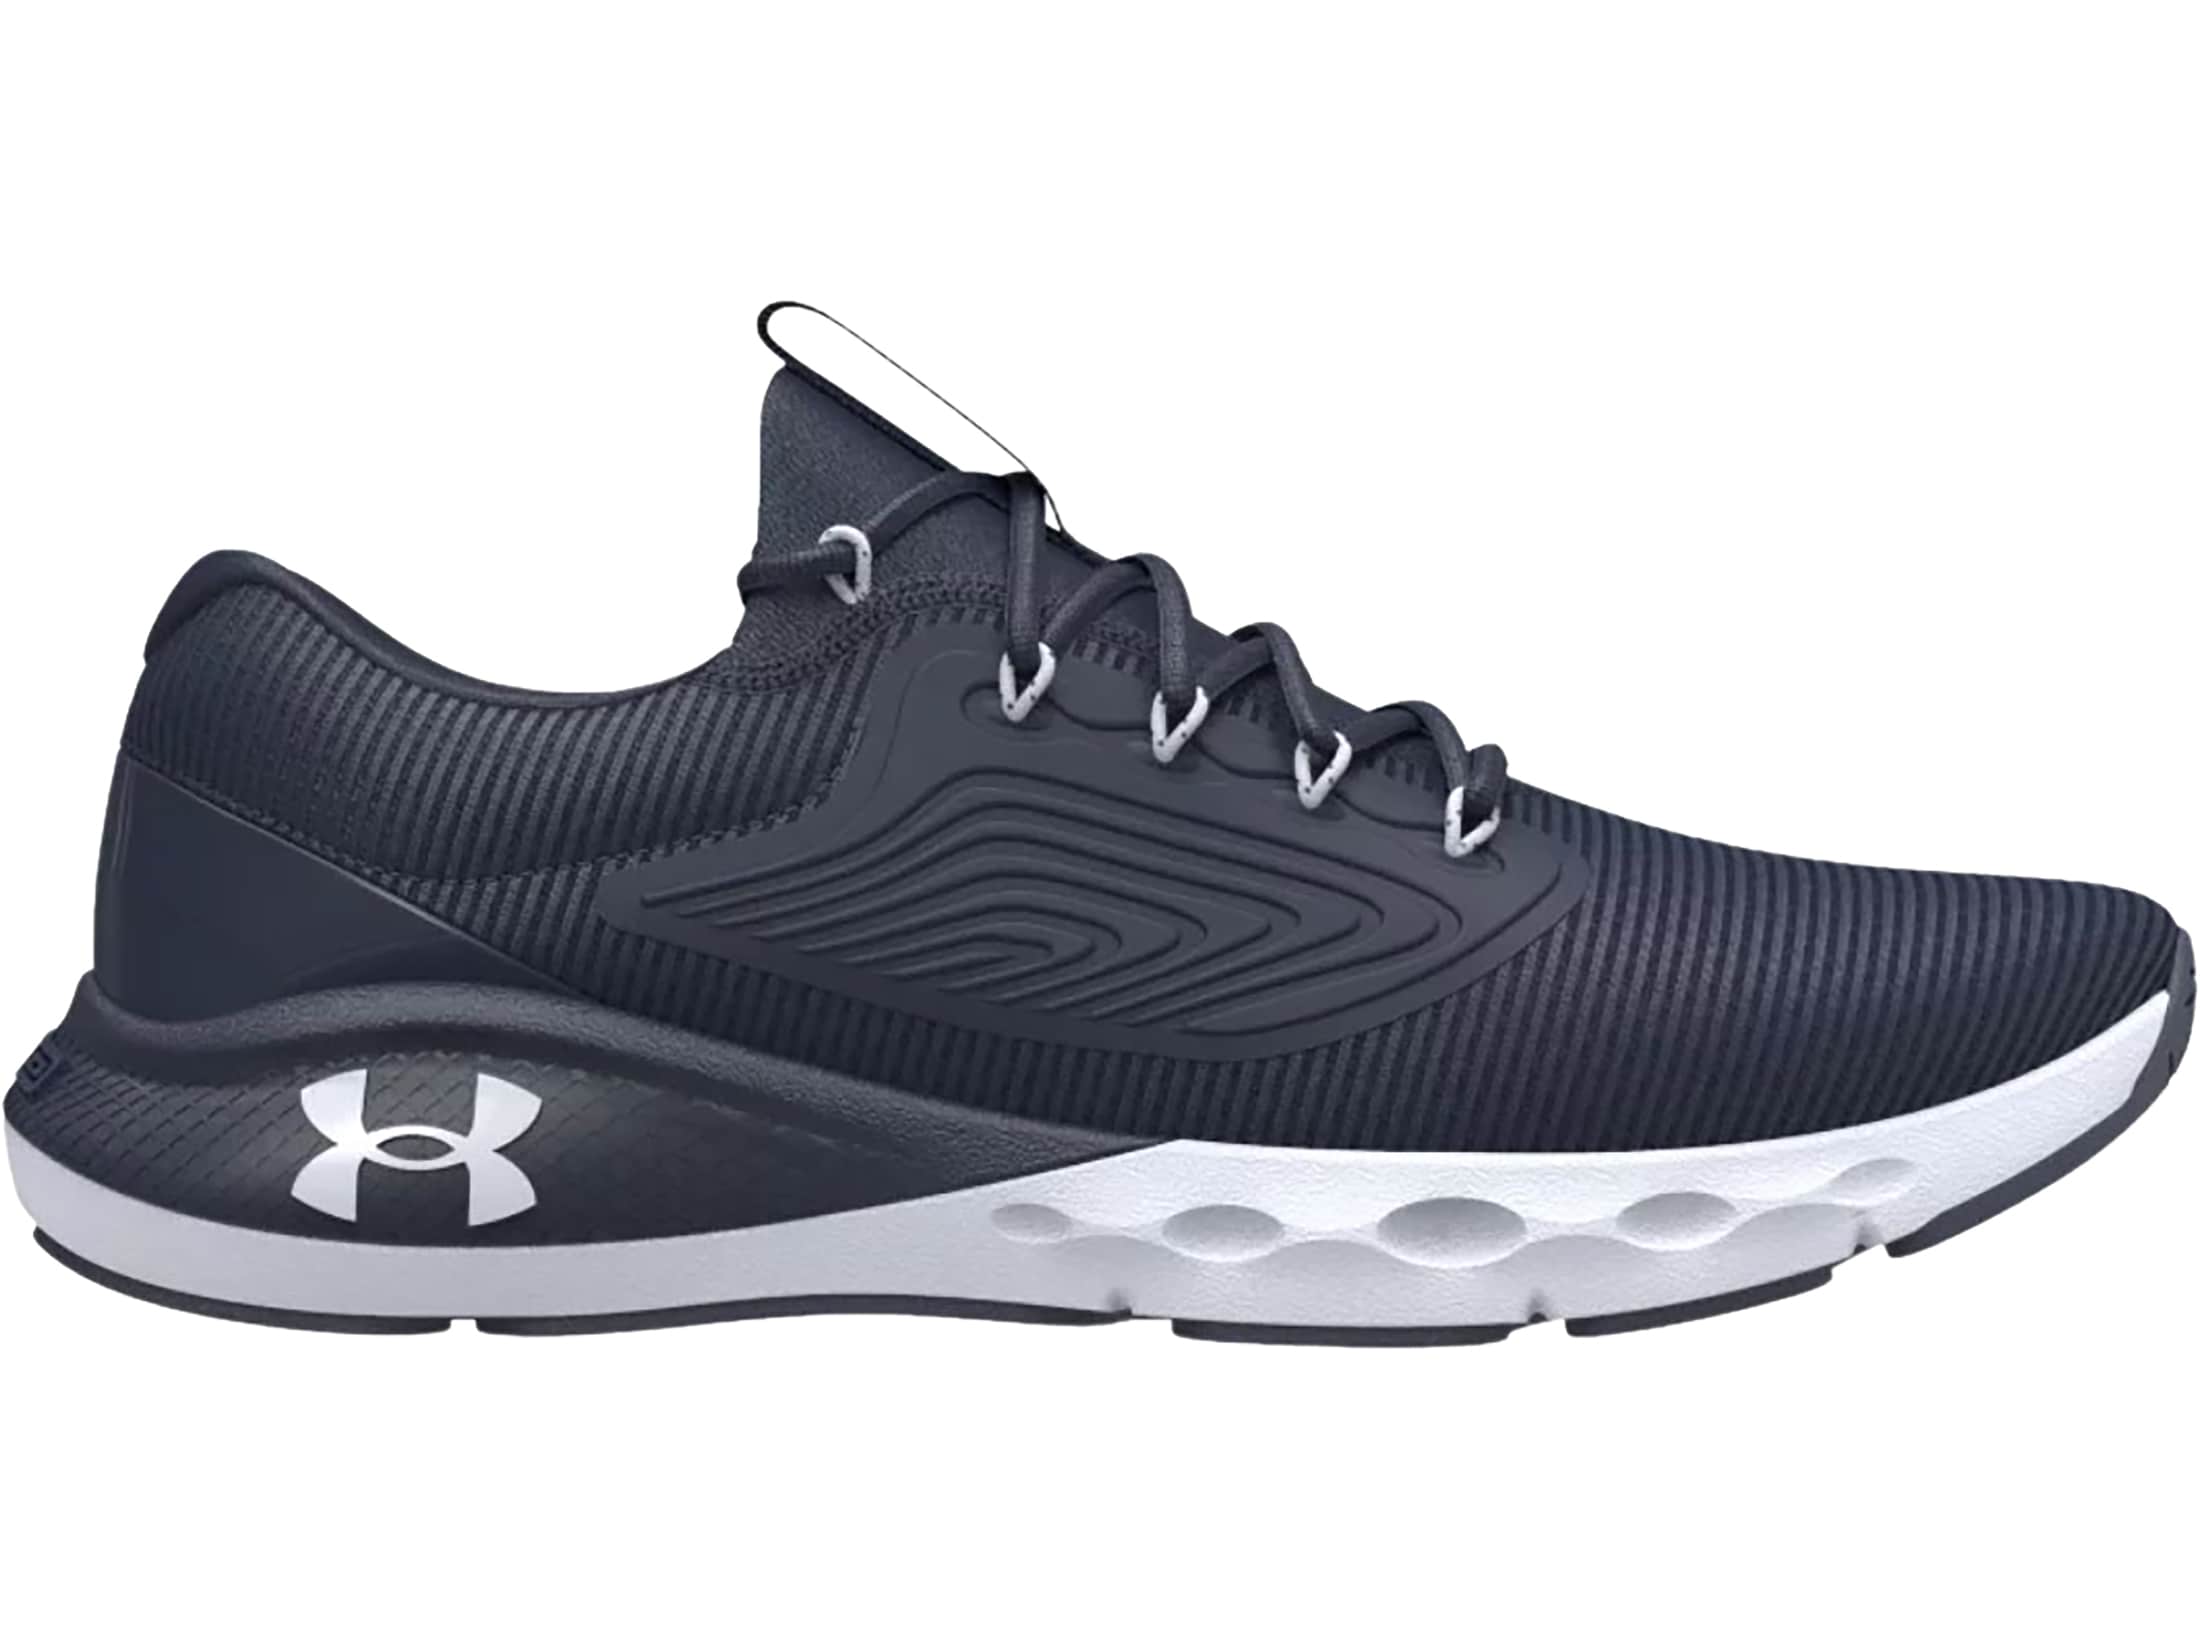 Under Armour Charged Vantage 2 Running Shoes Leather Mod Gray Men's 9